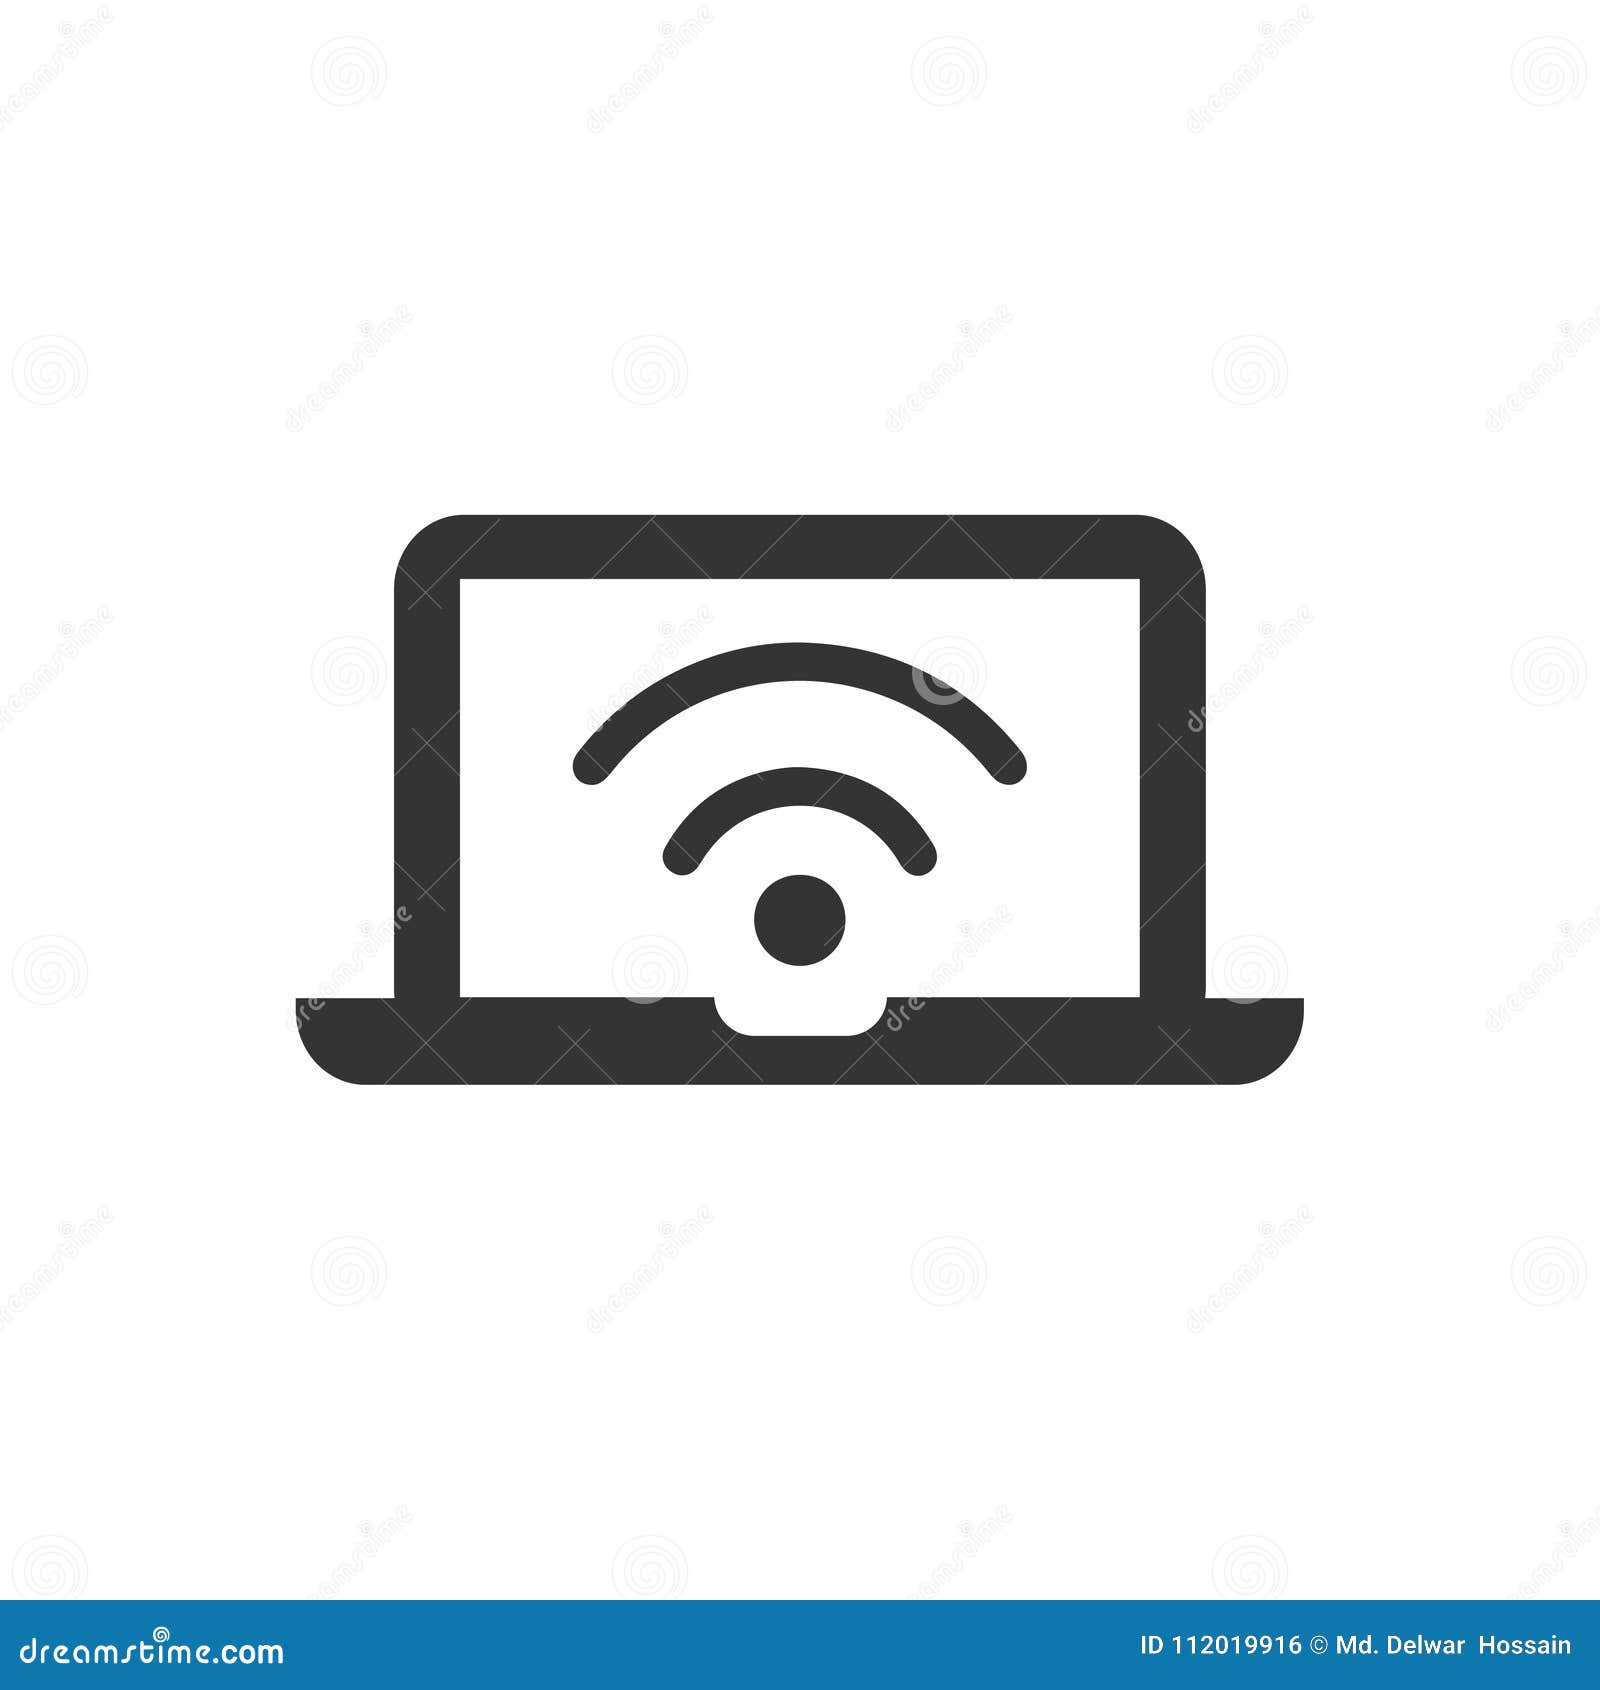 Wifi Connection Icon stock vector. Illustration of wifi - 112019916